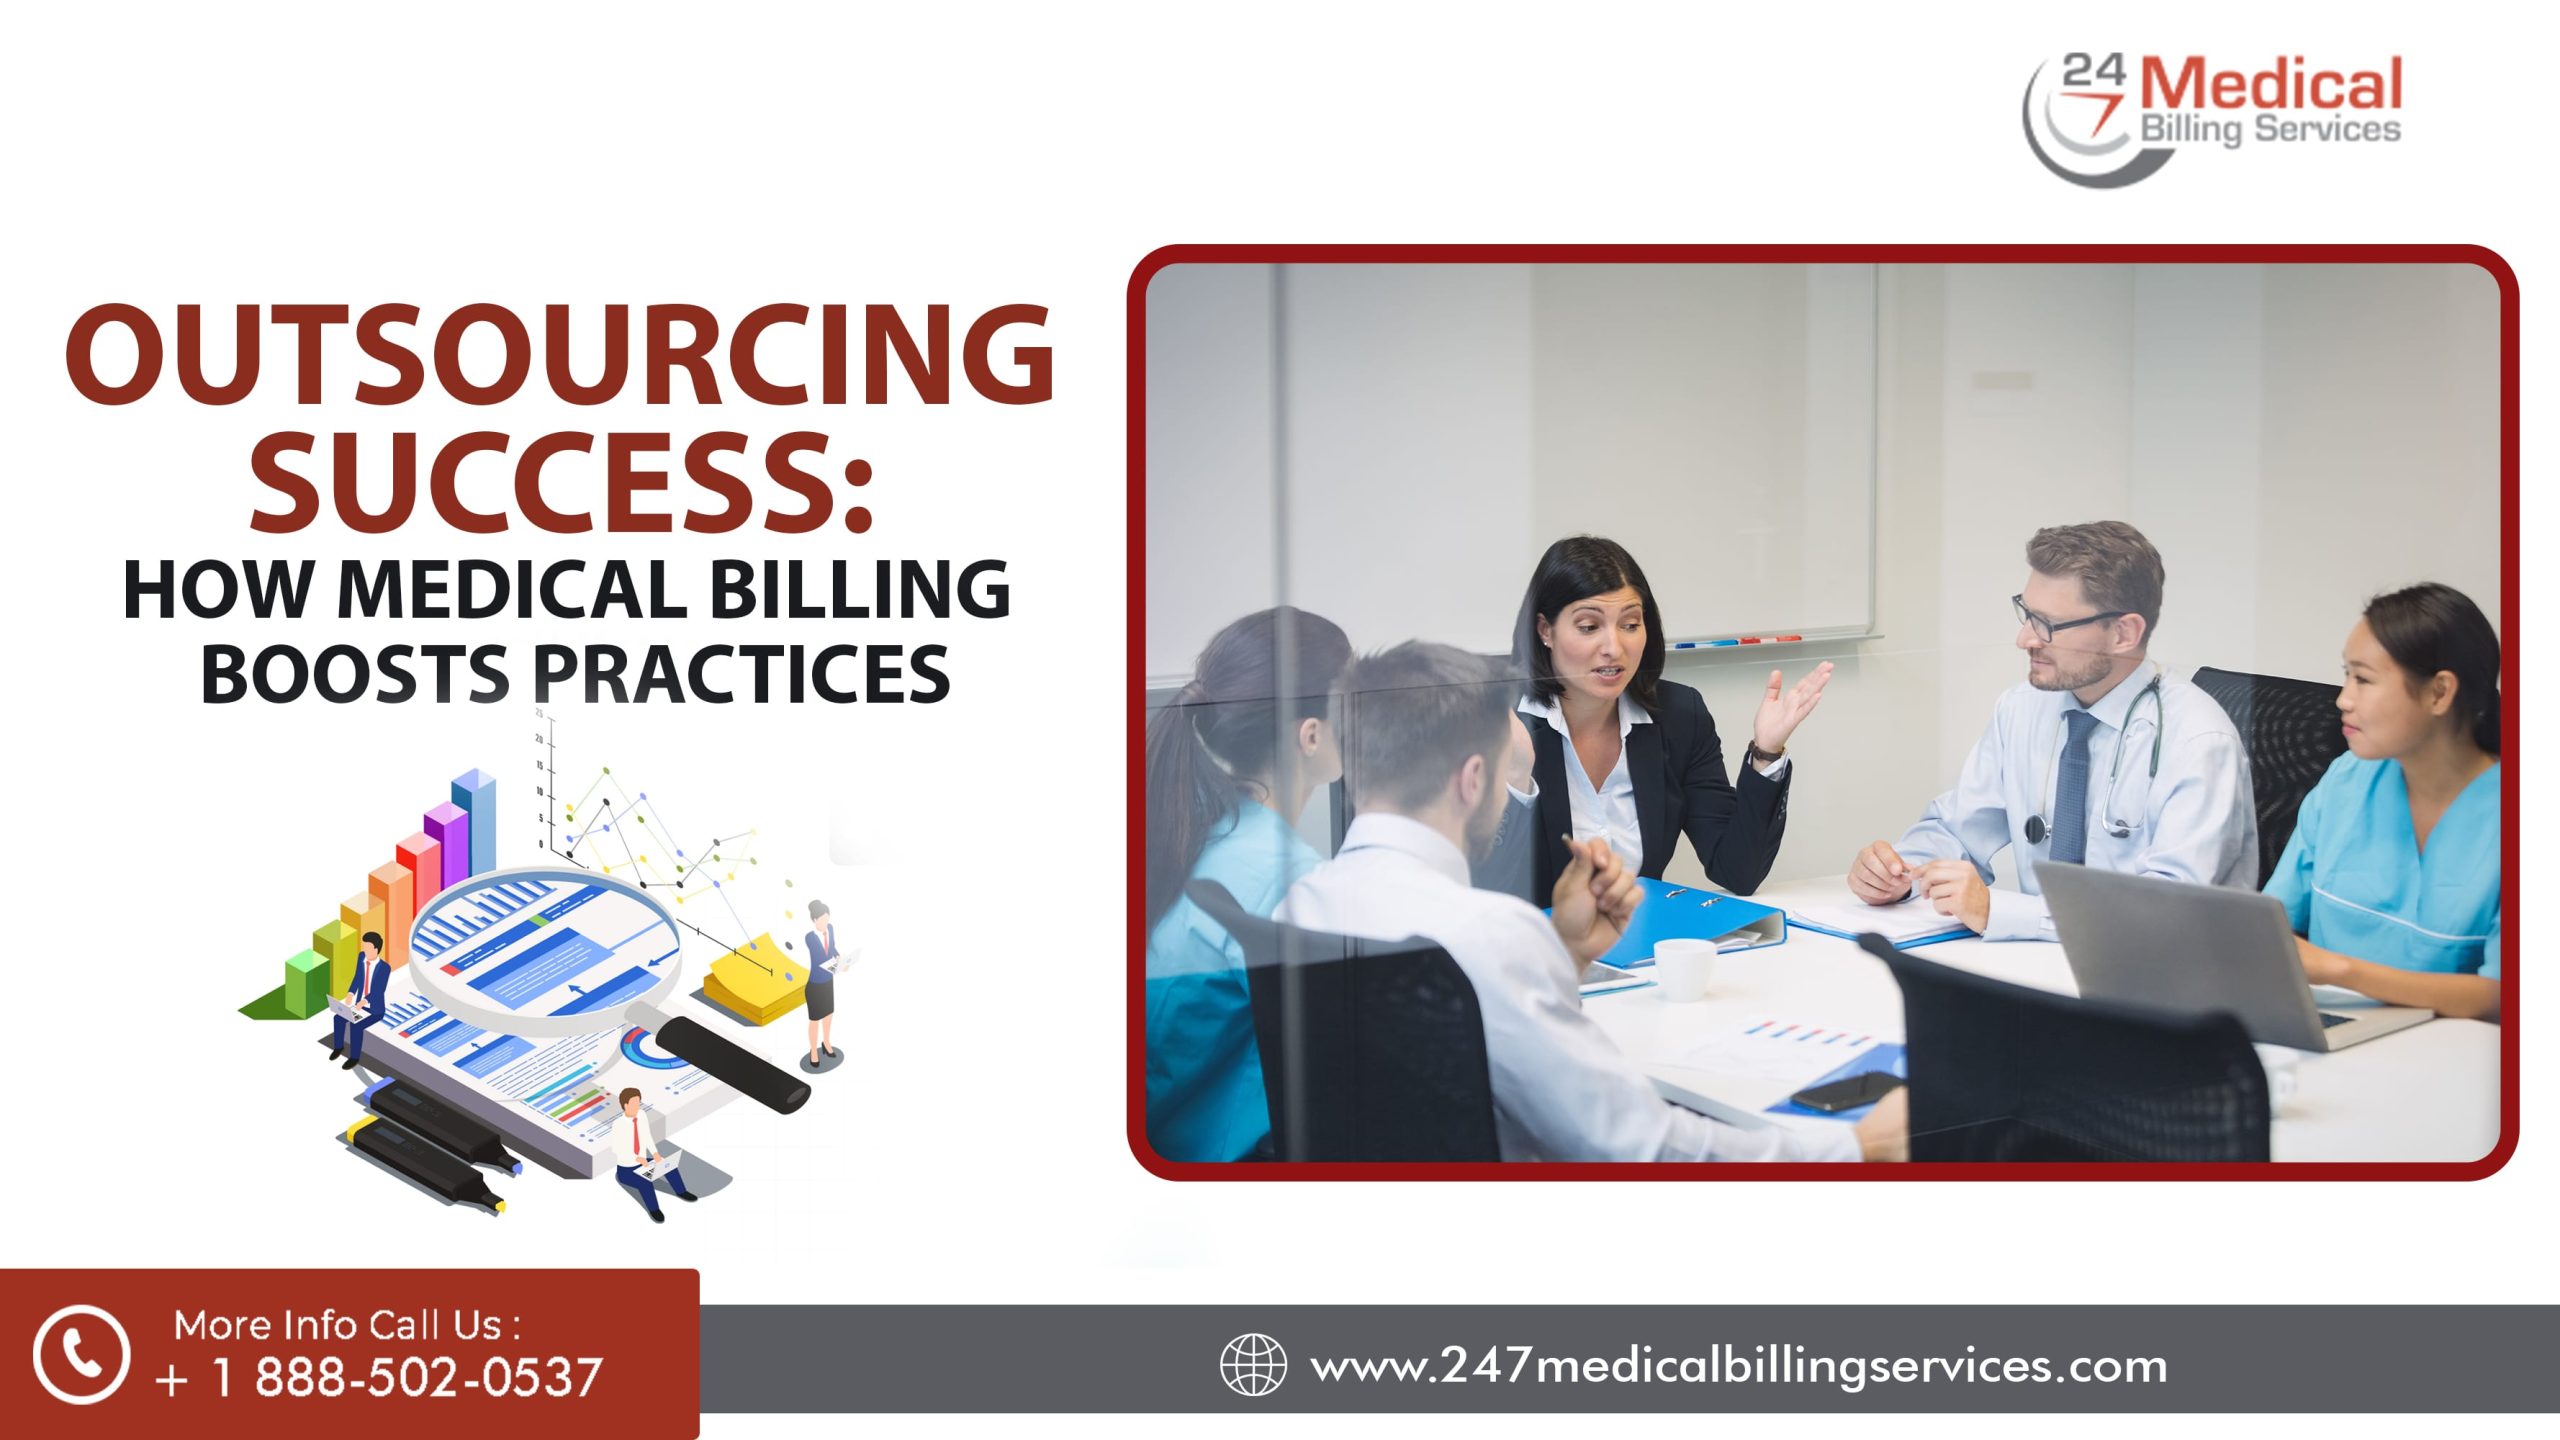  Outsourcing Success: How Medical Billing Boosts Practices